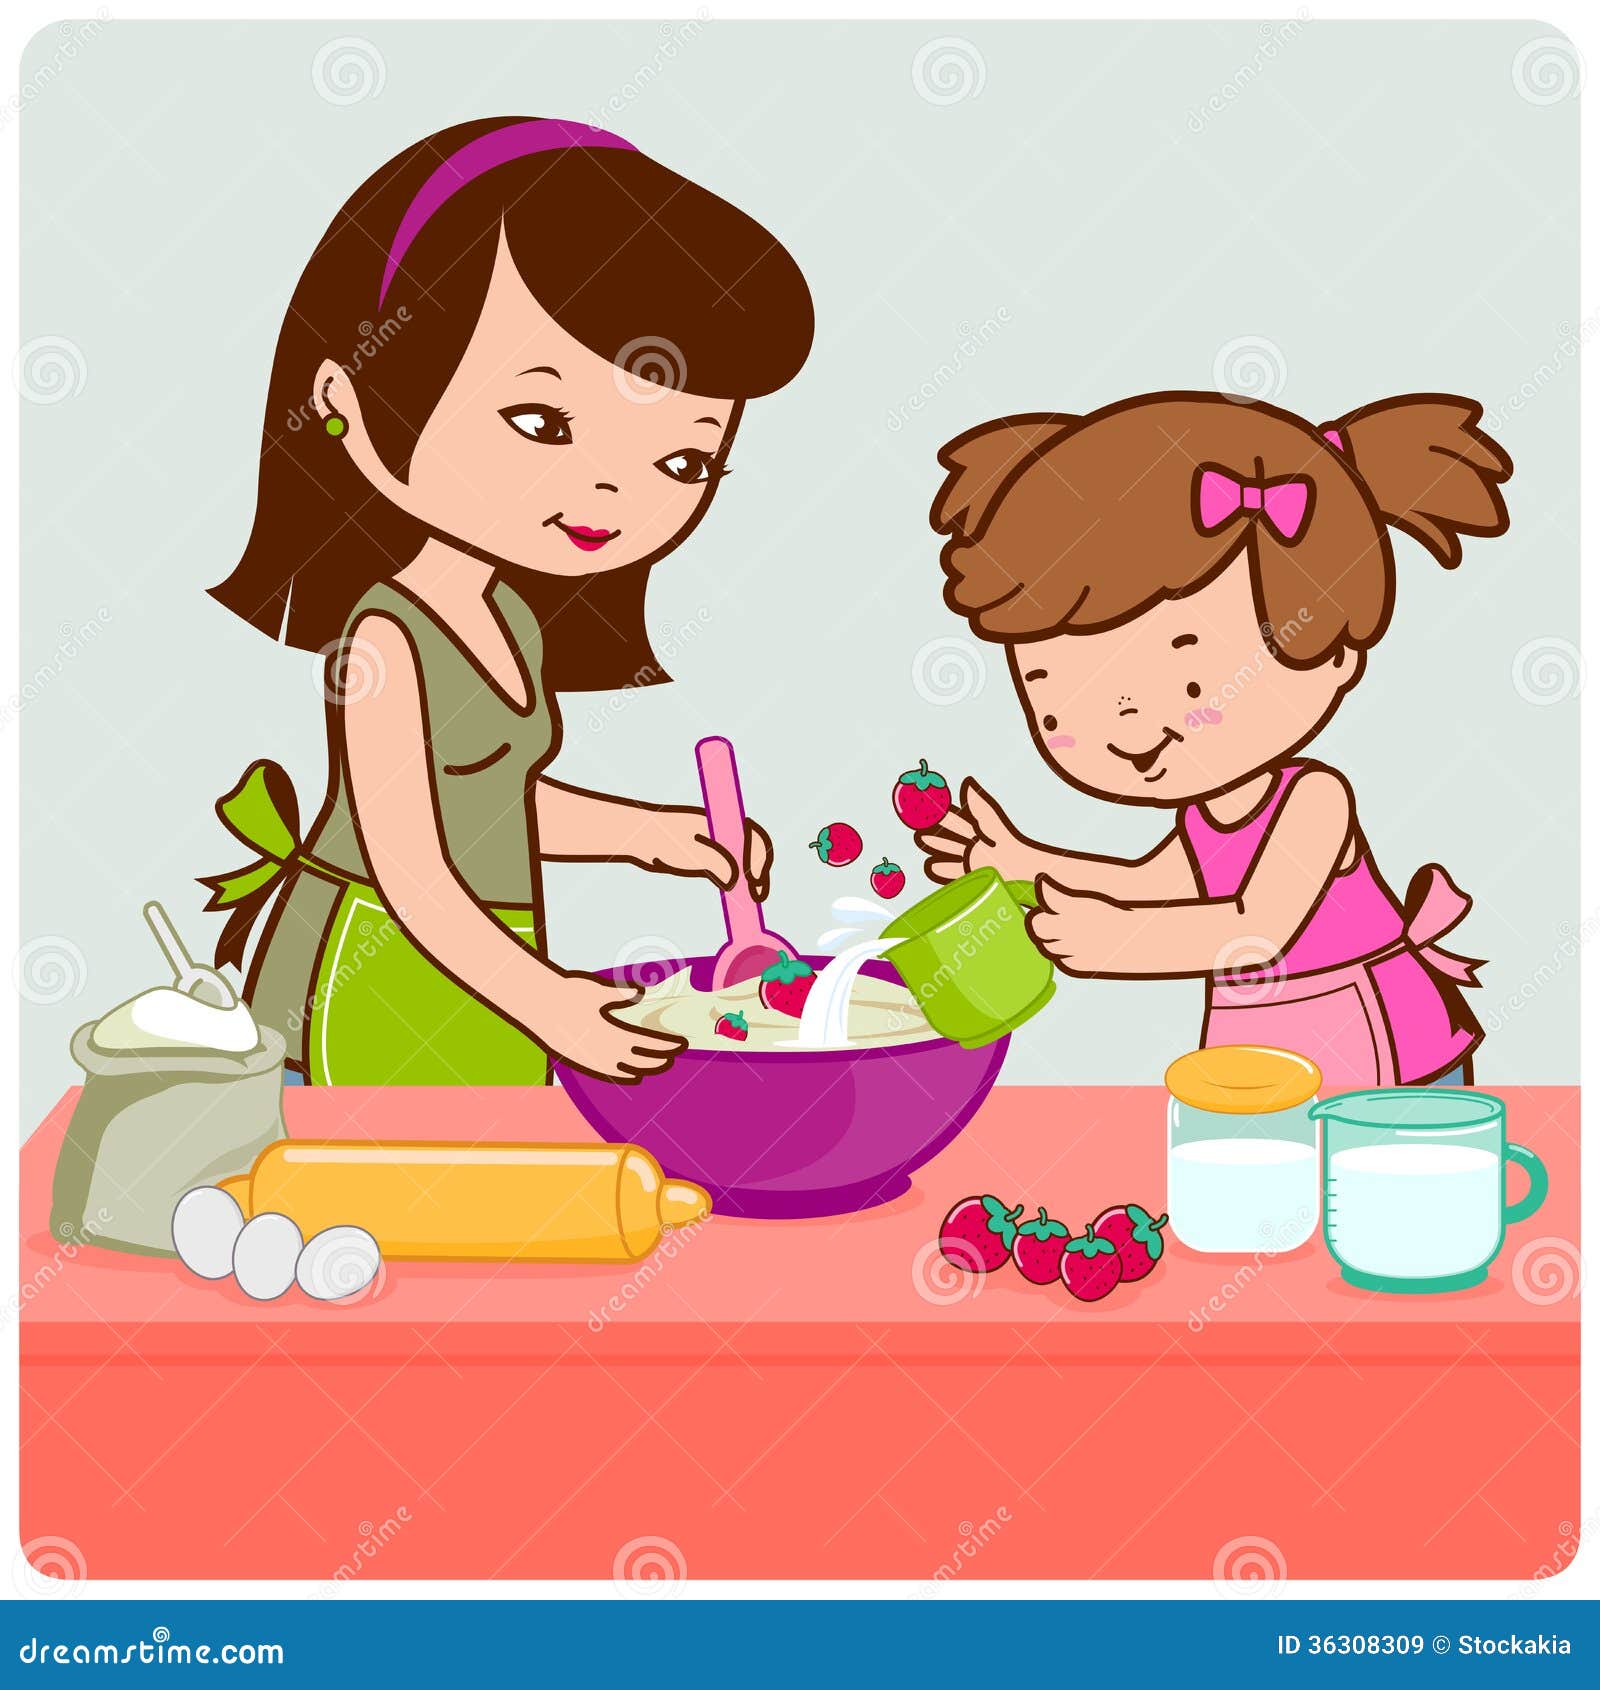 mom cooking clipart free - photo #15